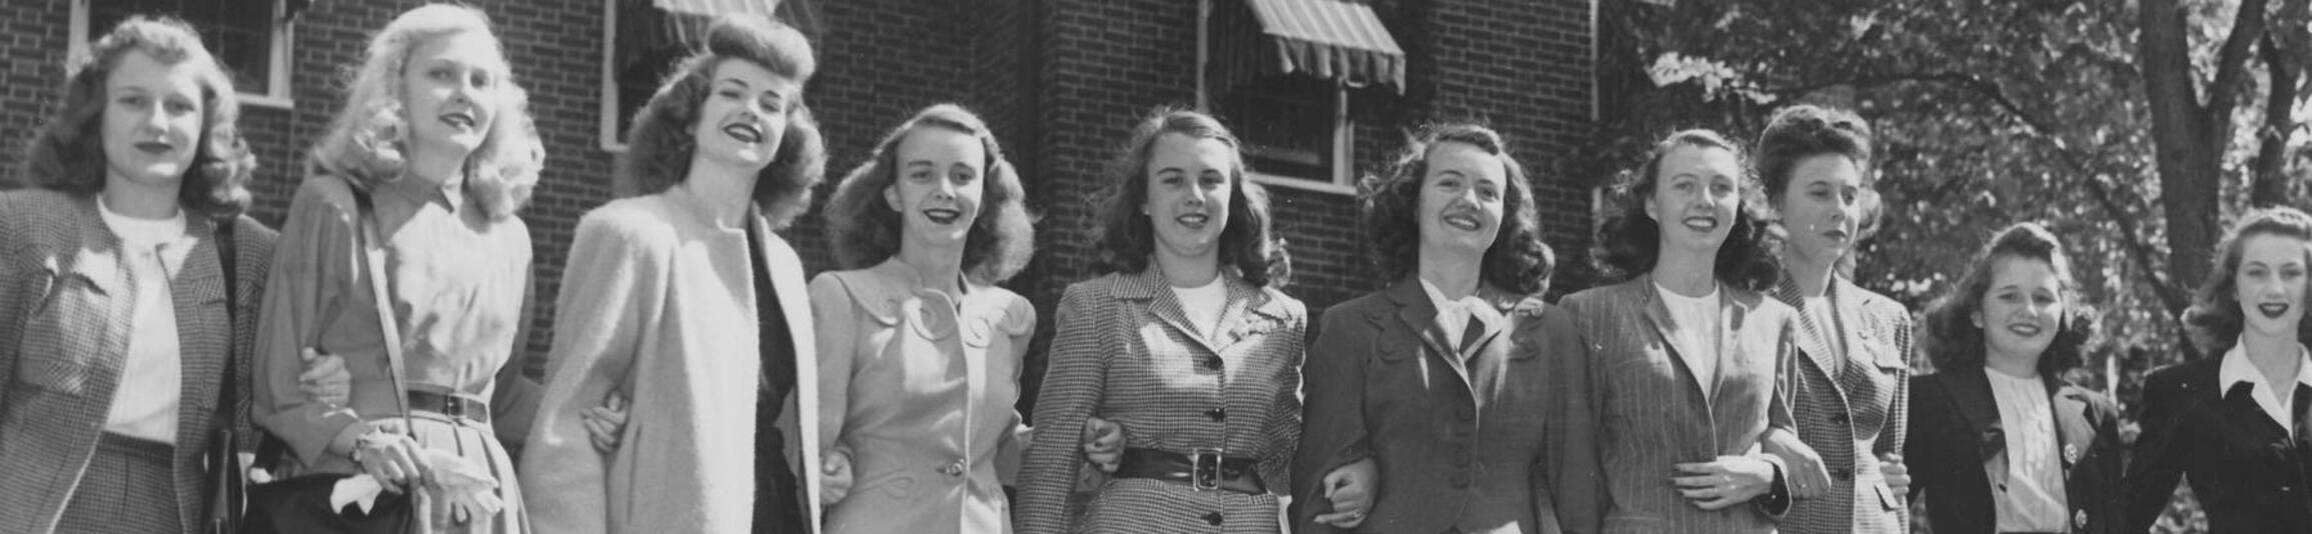 Ursuline college old photo of students in the 1940s3